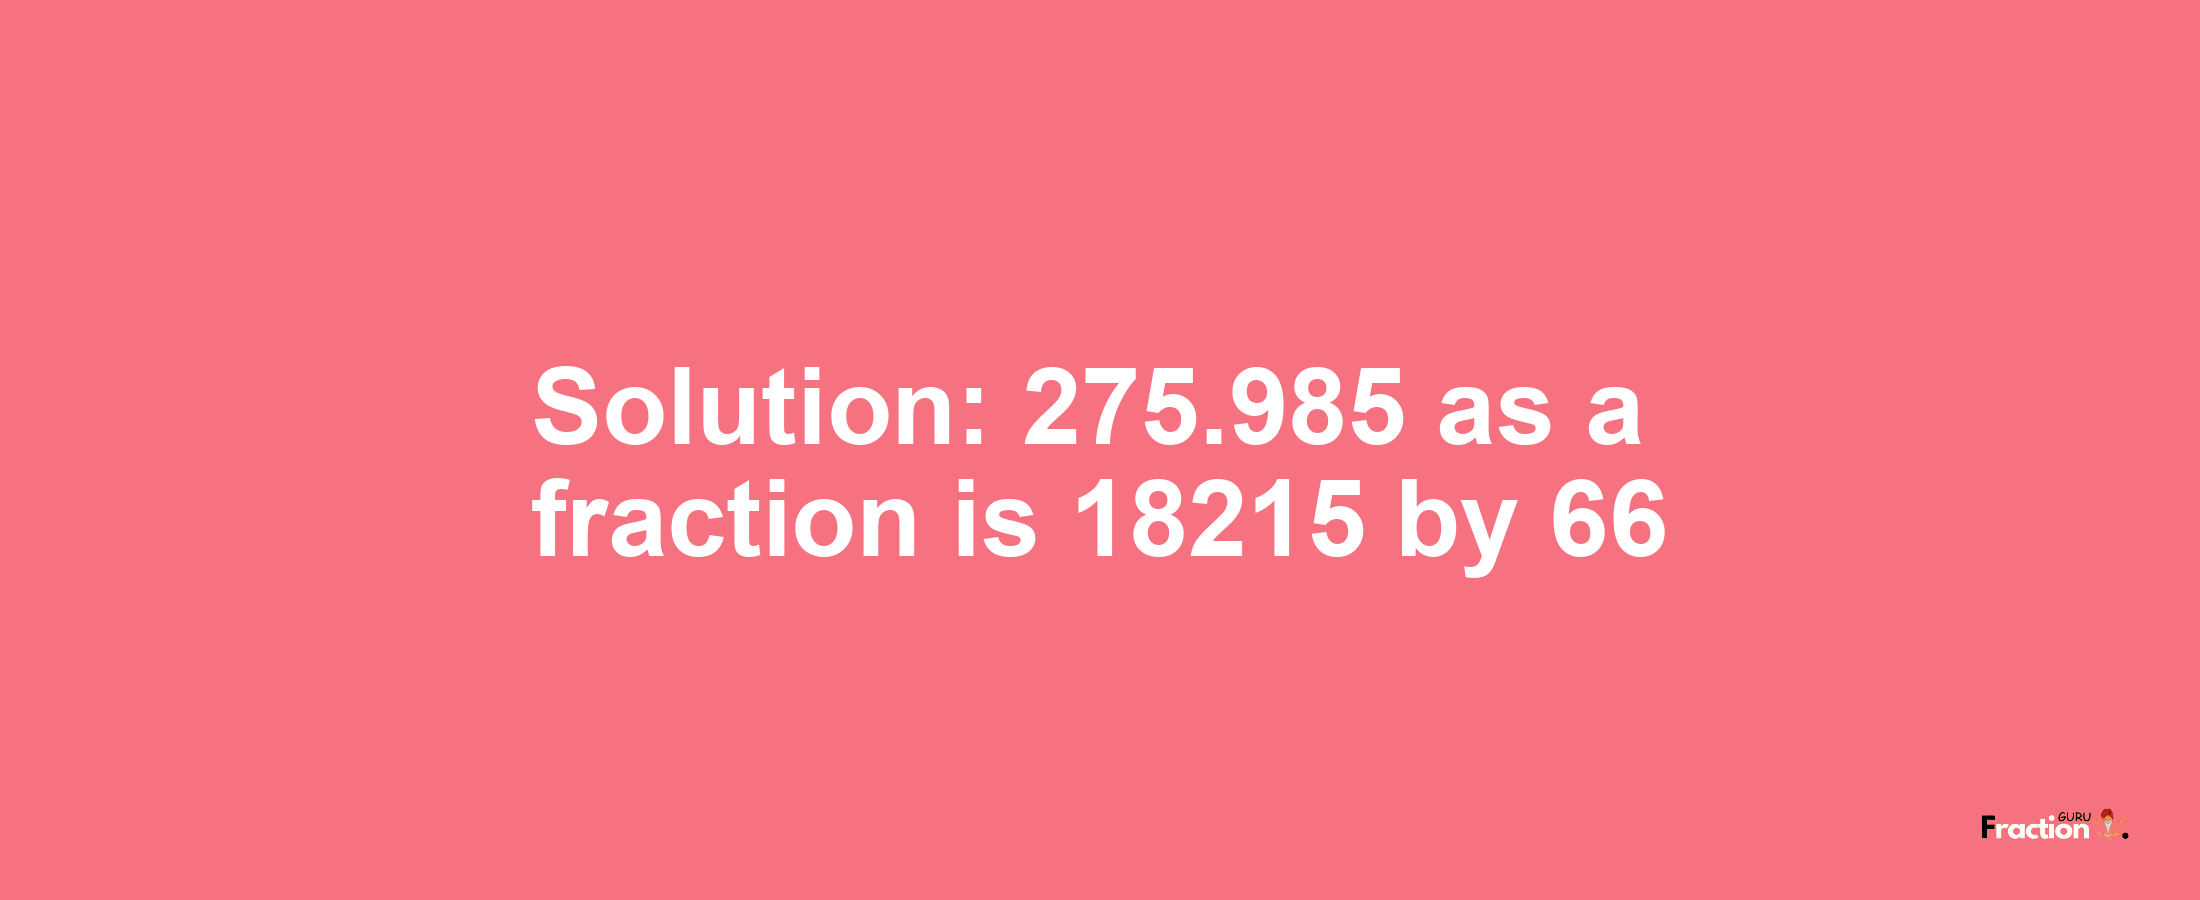 Solution:275.985 as a fraction is 18215/66